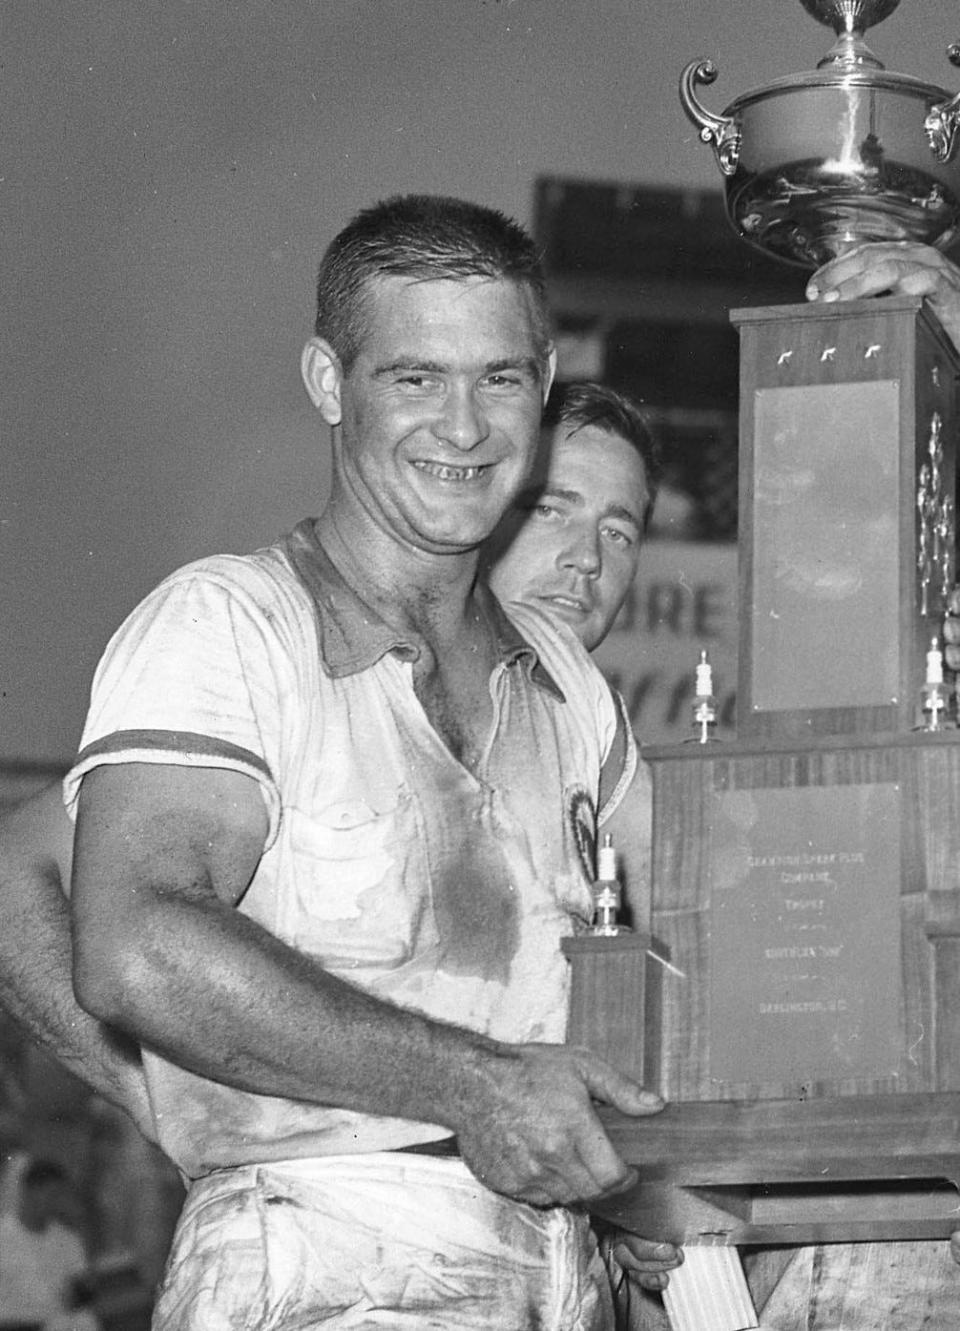 Speedy Thompson after his 1957 Southern 500 win.